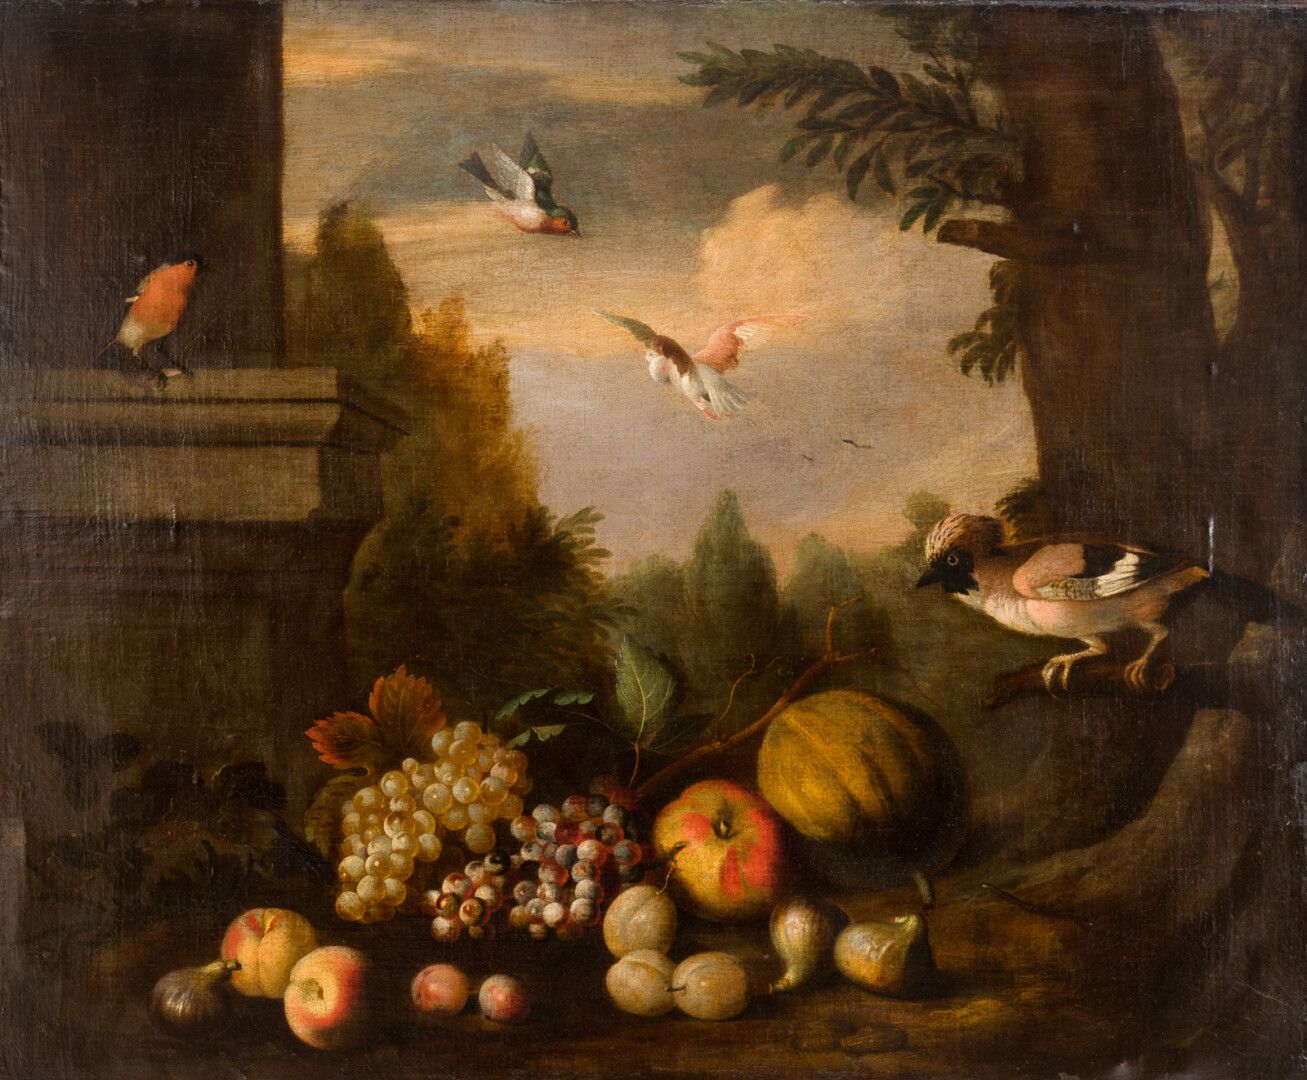 Null Attributed to Tobias STRANOVER (1684 - 1756)

Still life with birds

Oil on&hellip;